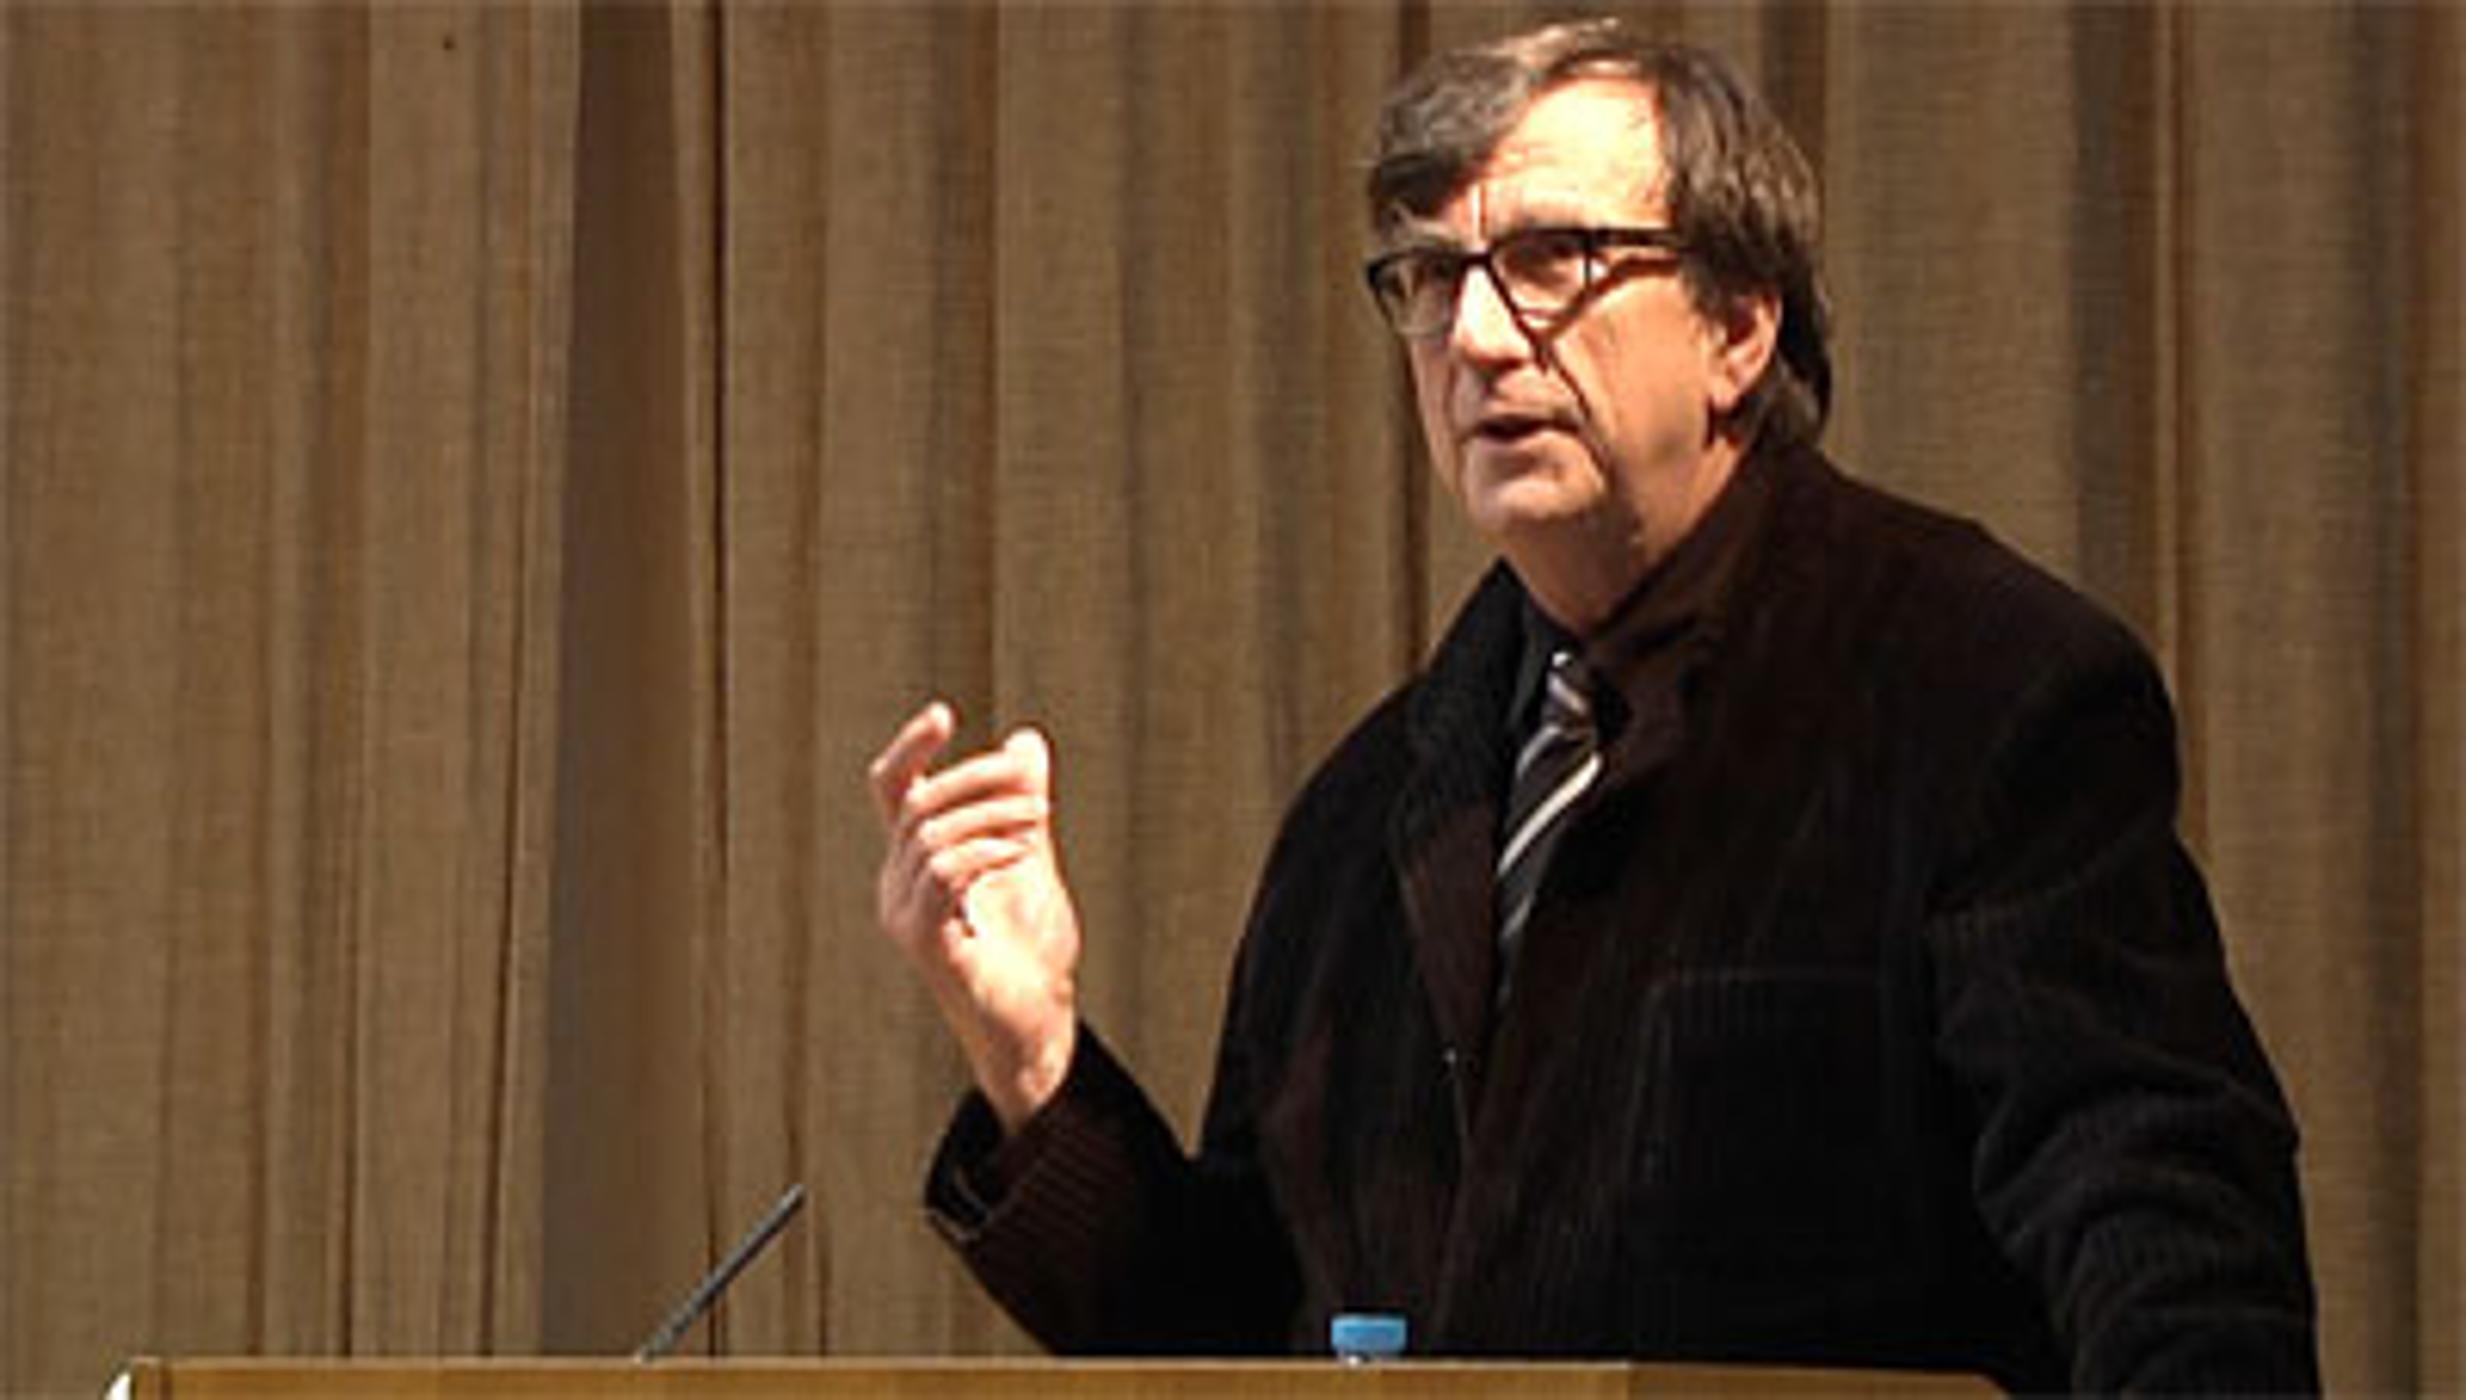 Professor Bruno Latour: The Modes of Existence project: an exercise in collective inquiry and digital humanities